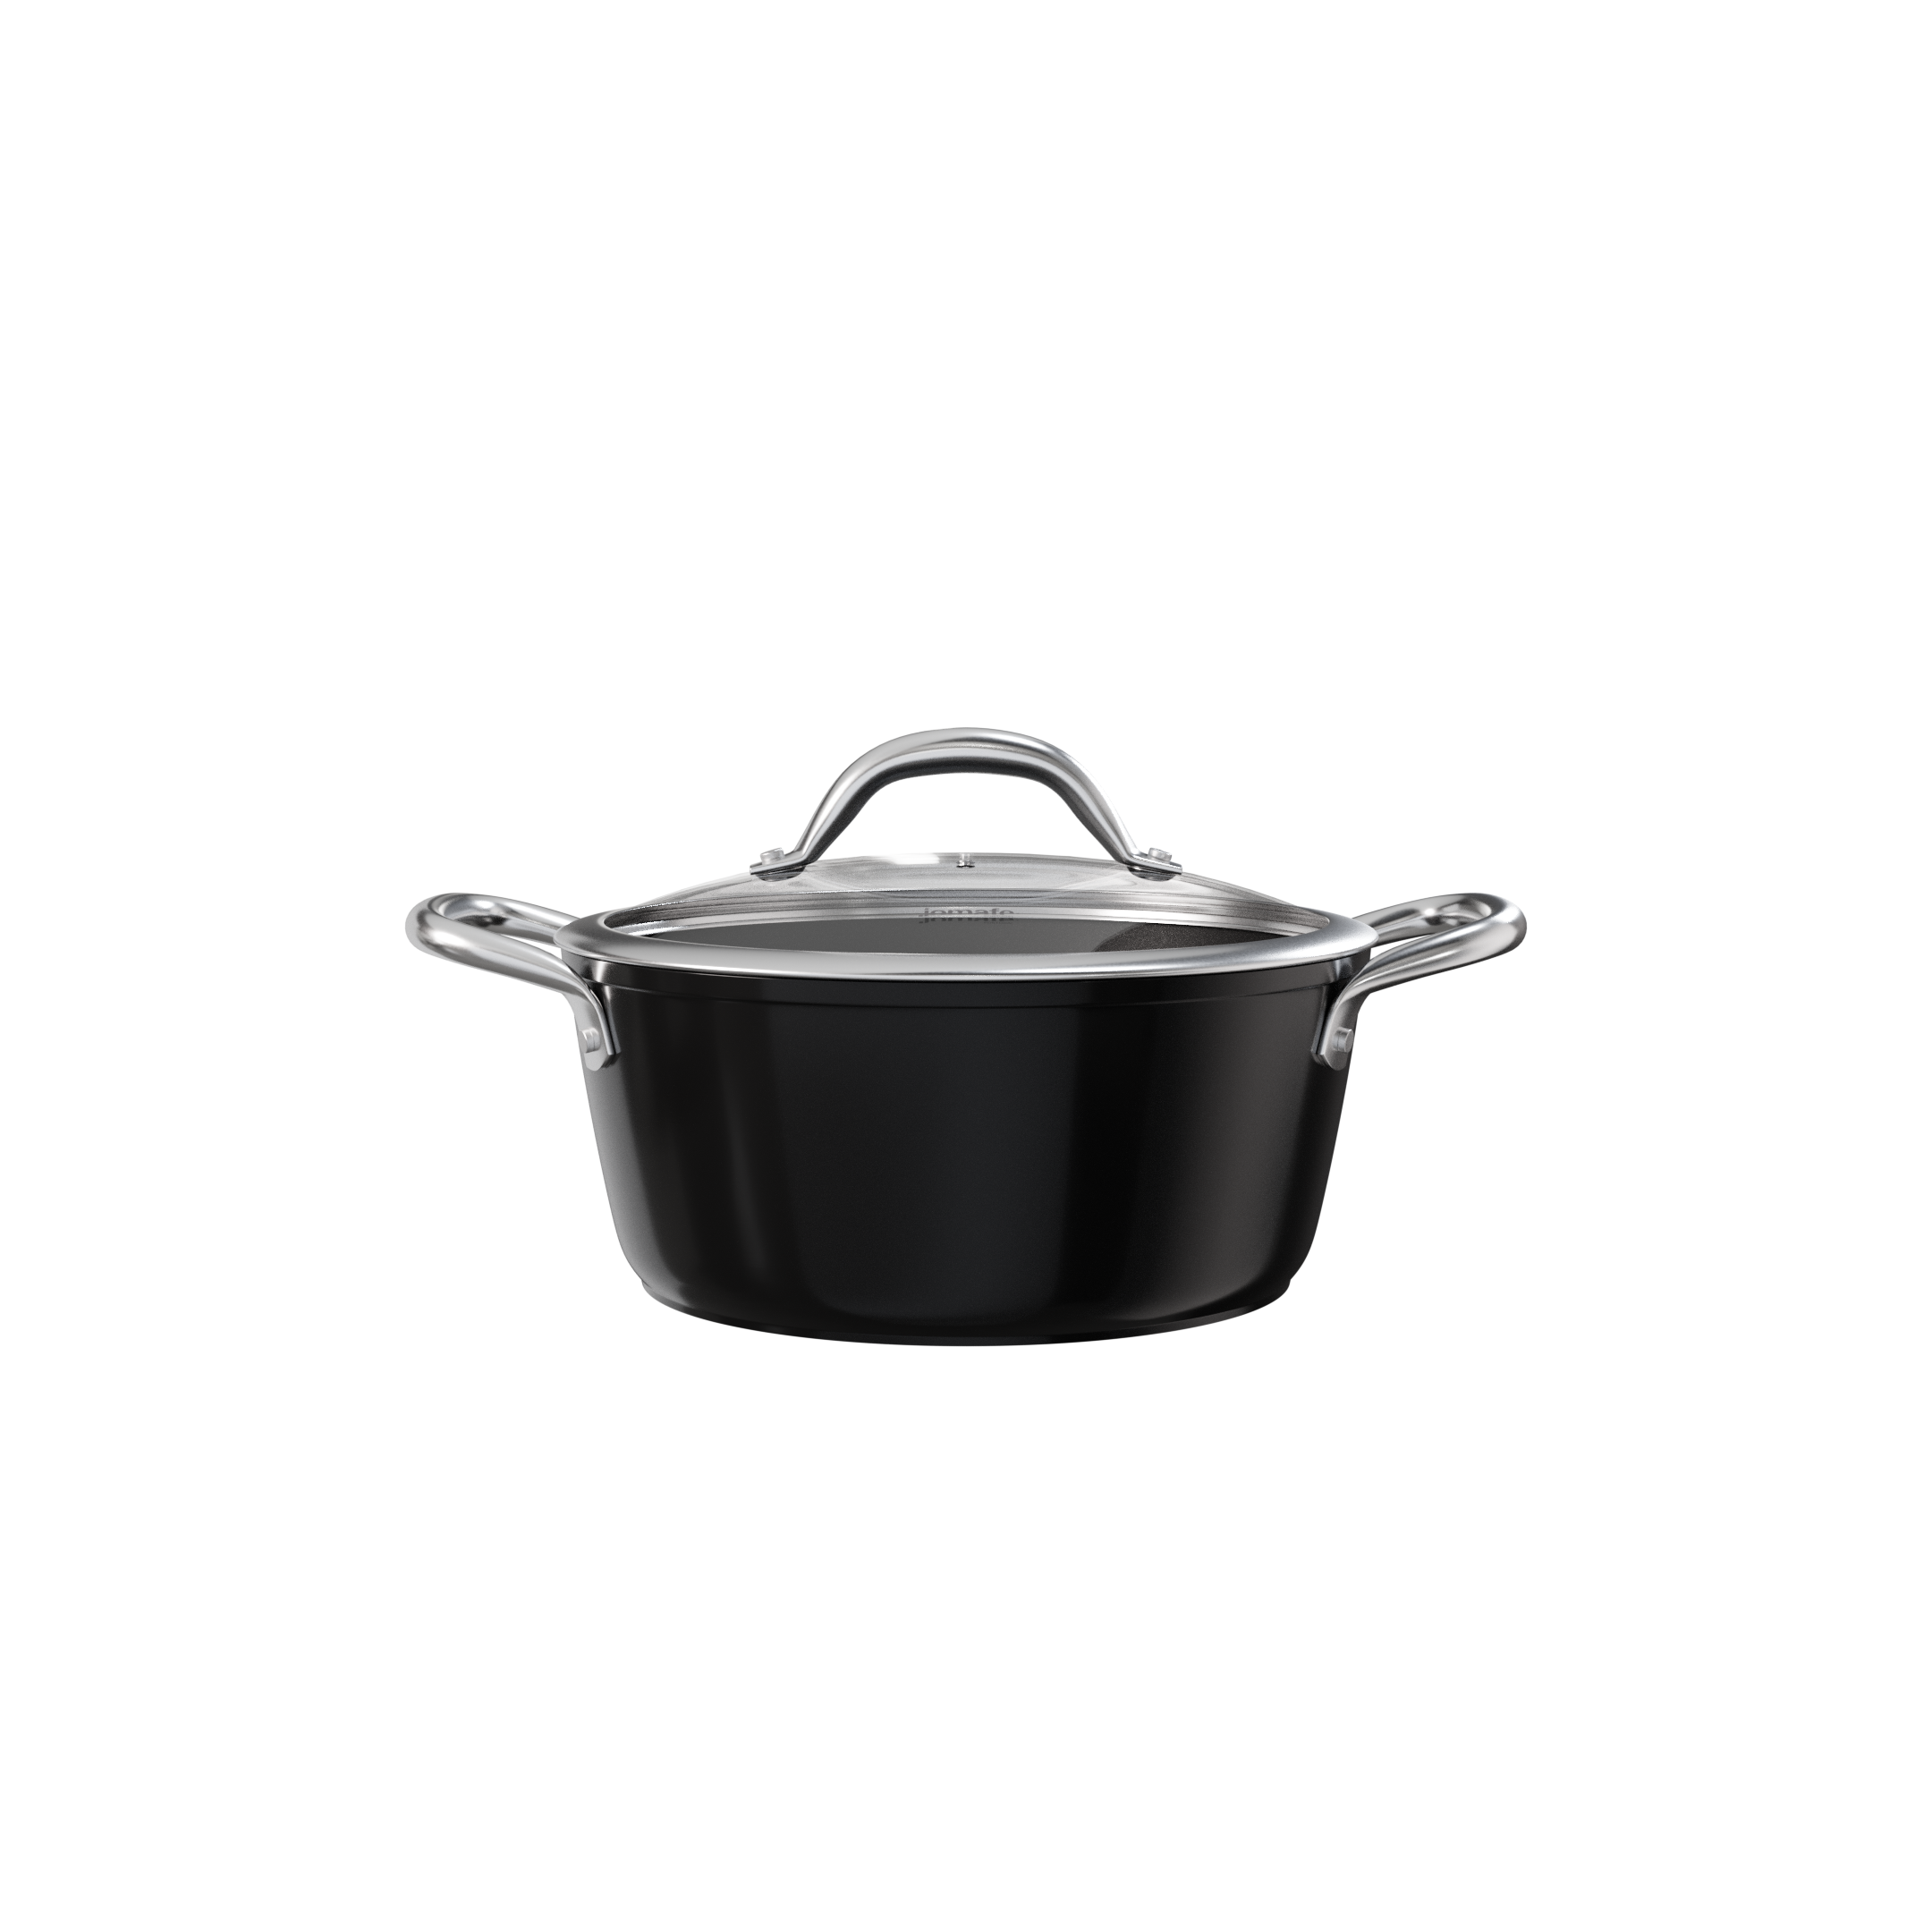 16CM JOMAFE INDUCTION CASSEROLE QUALITY STAINLESS STEEL 